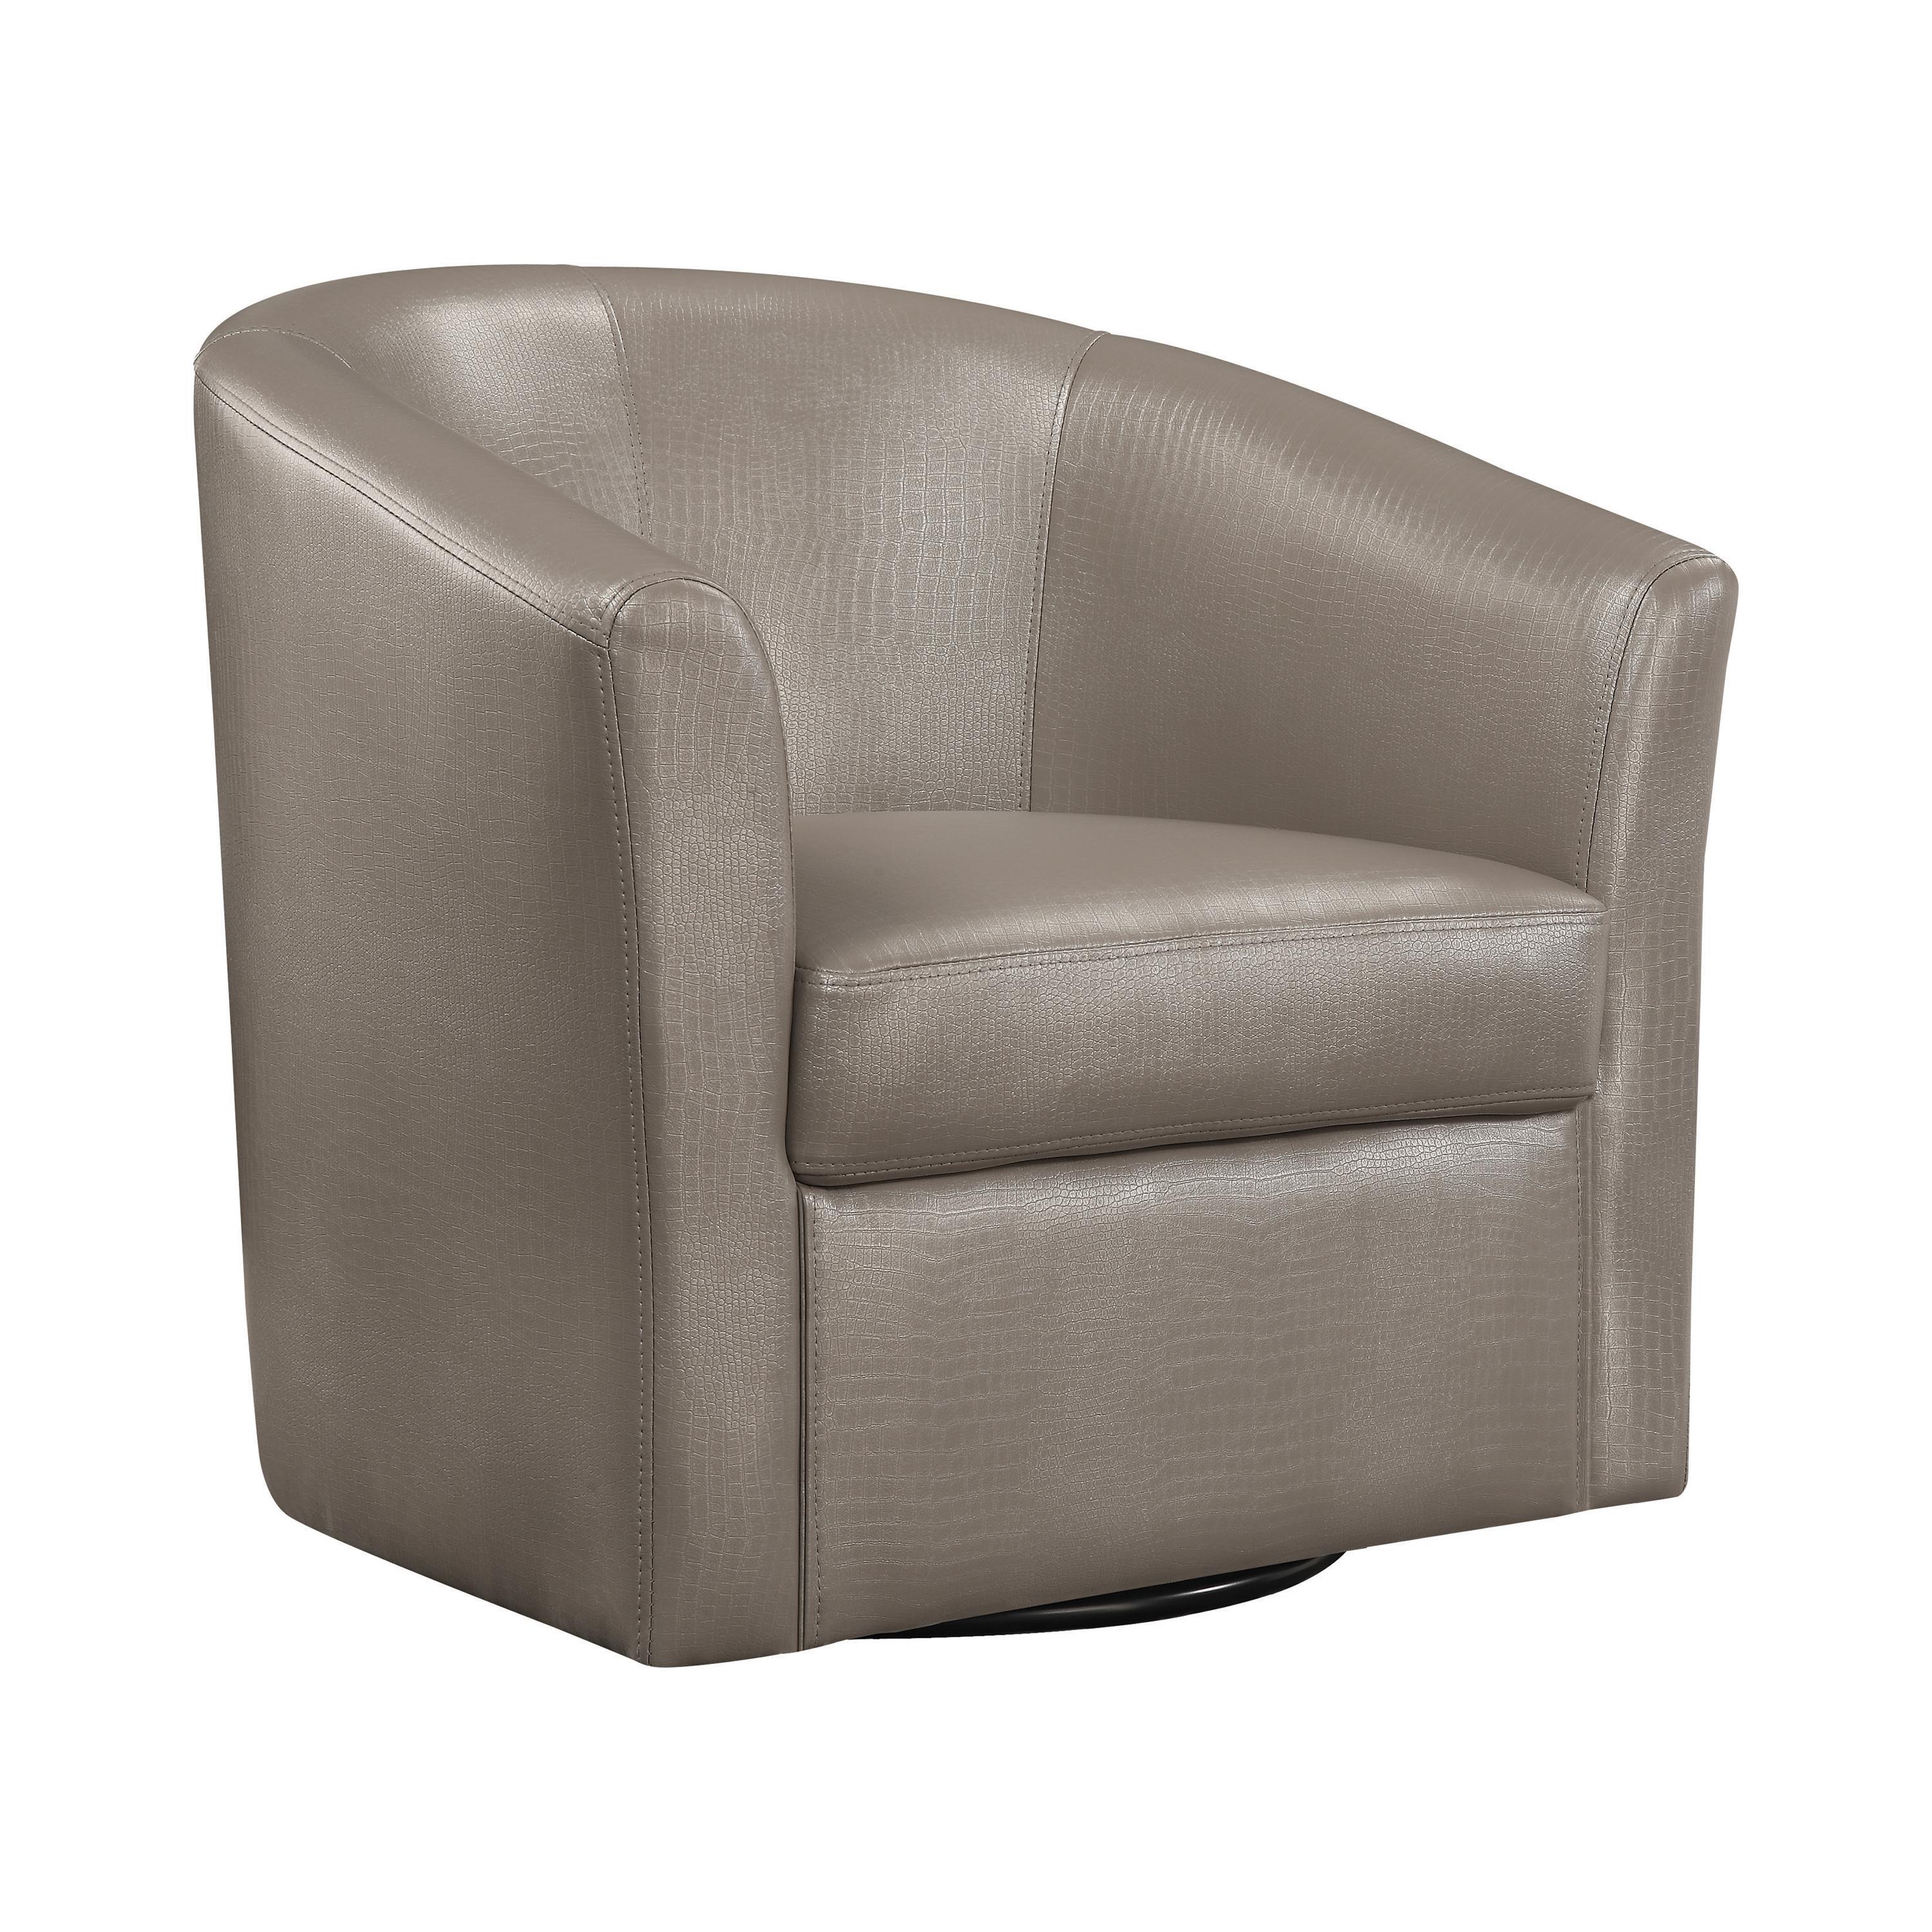 Contemporary Accent Chair 902726 902726 in Champagne Leatherette